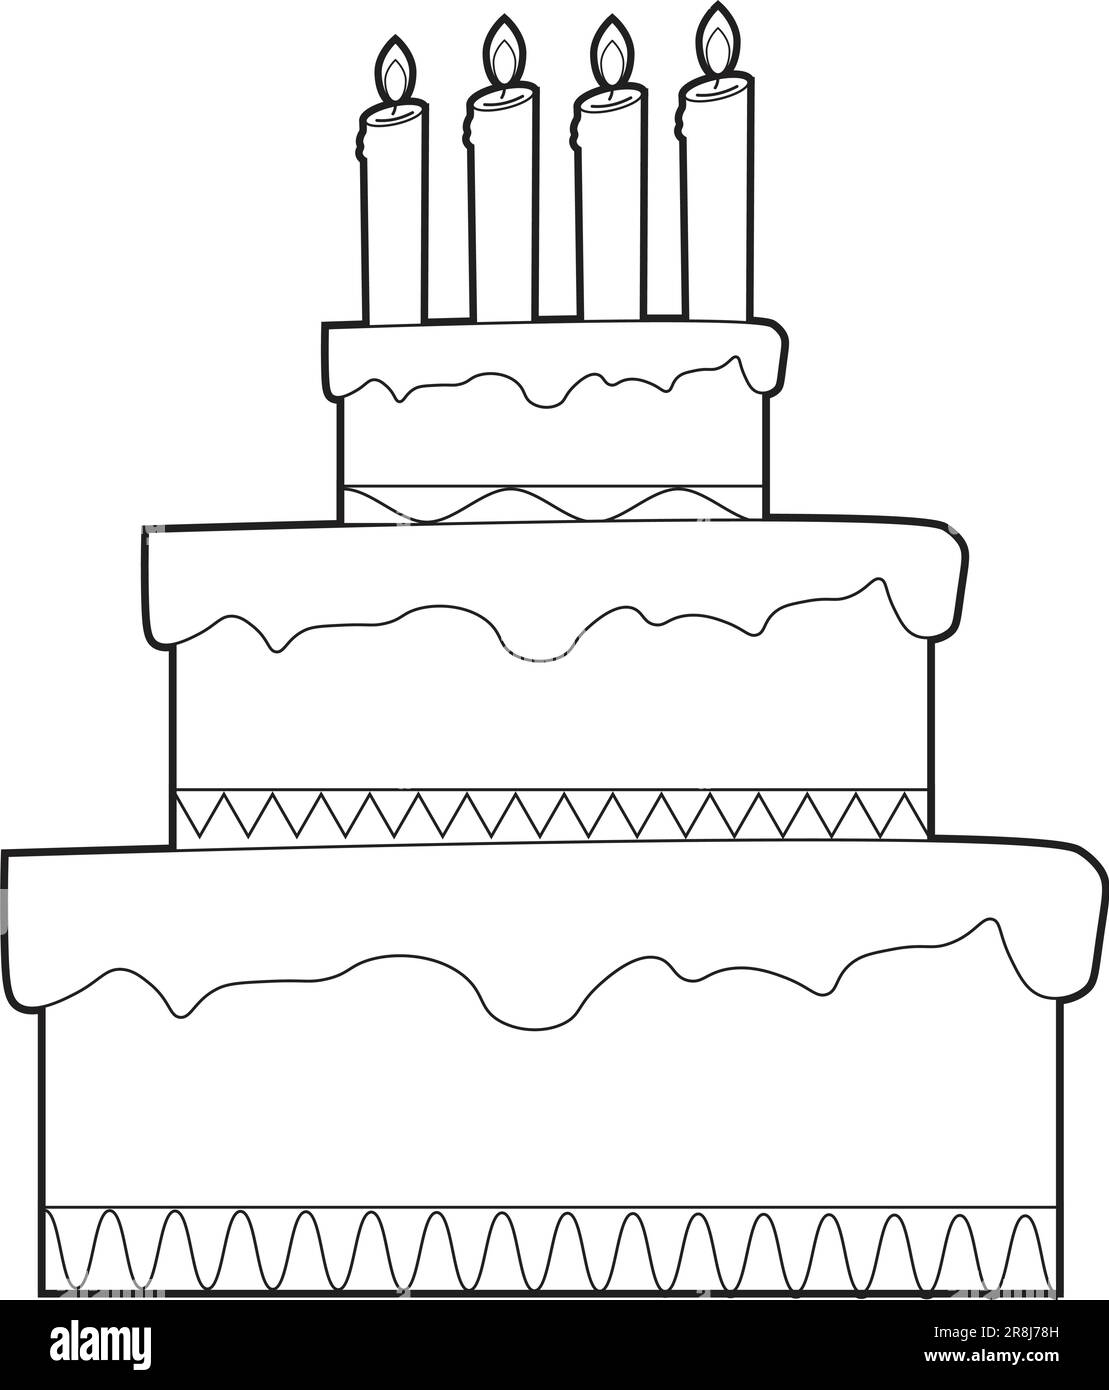 birthday cake coloring pages preschool